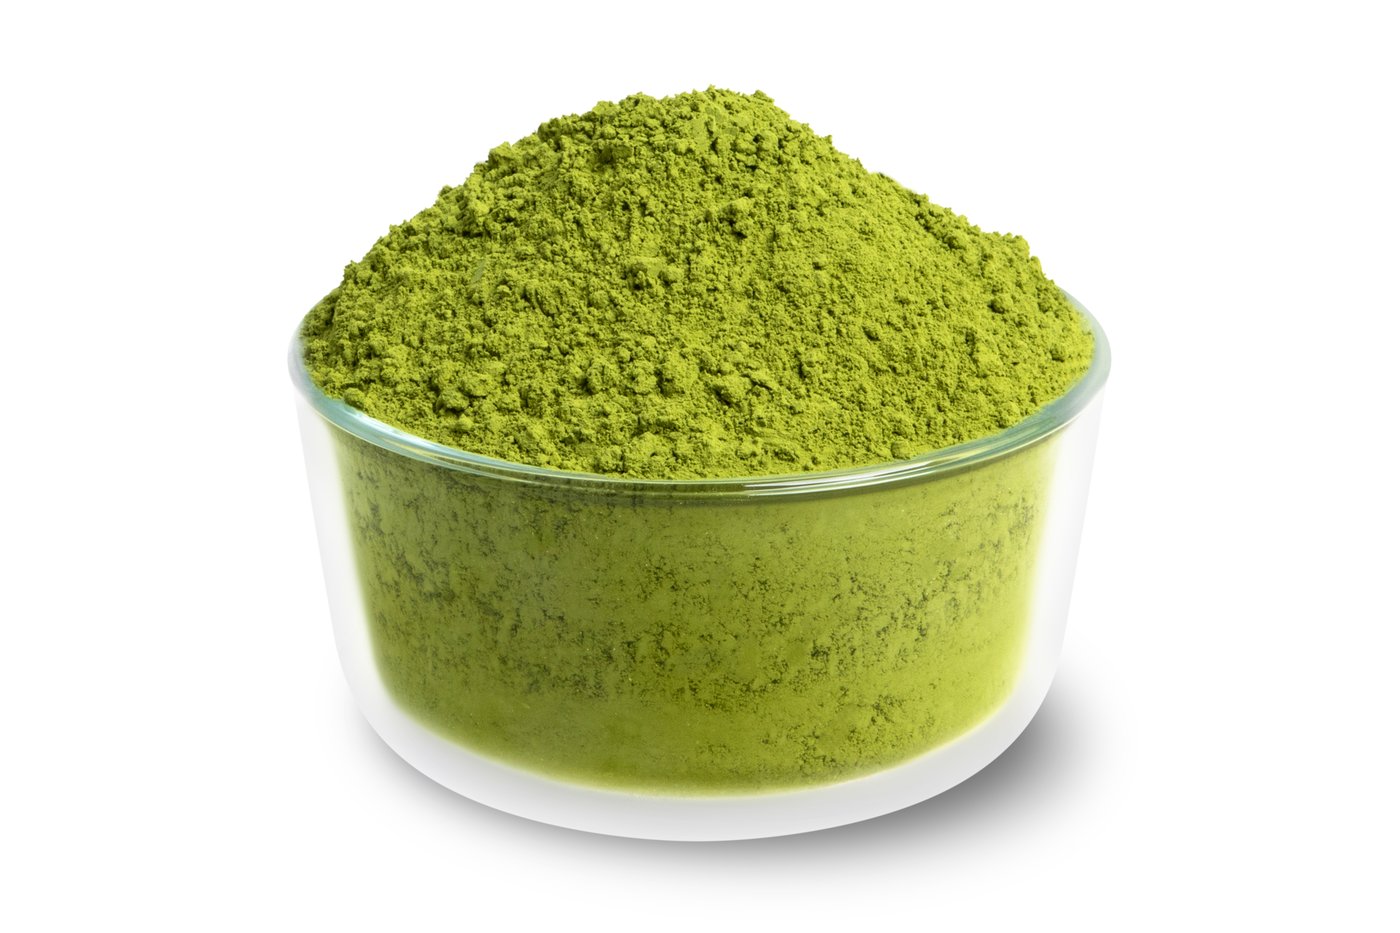 What's the difference between Matcha and Green Tea Powder?